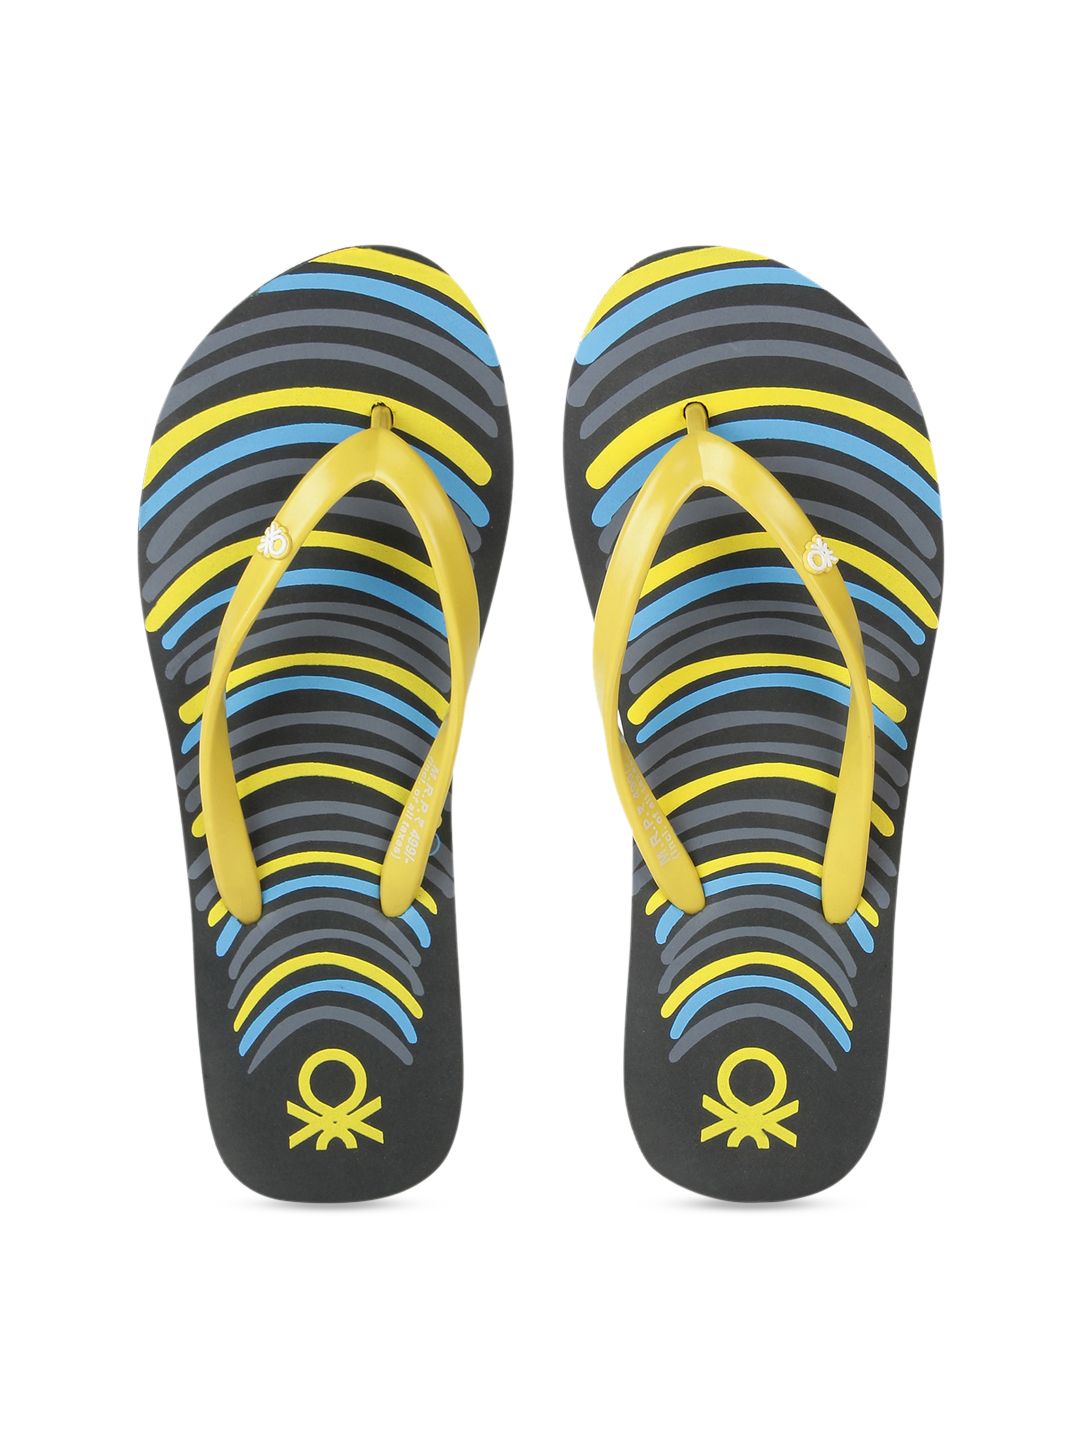 United Colors of Benetton Women Black & Yellow Striped Thong Flip-Flops Price in India